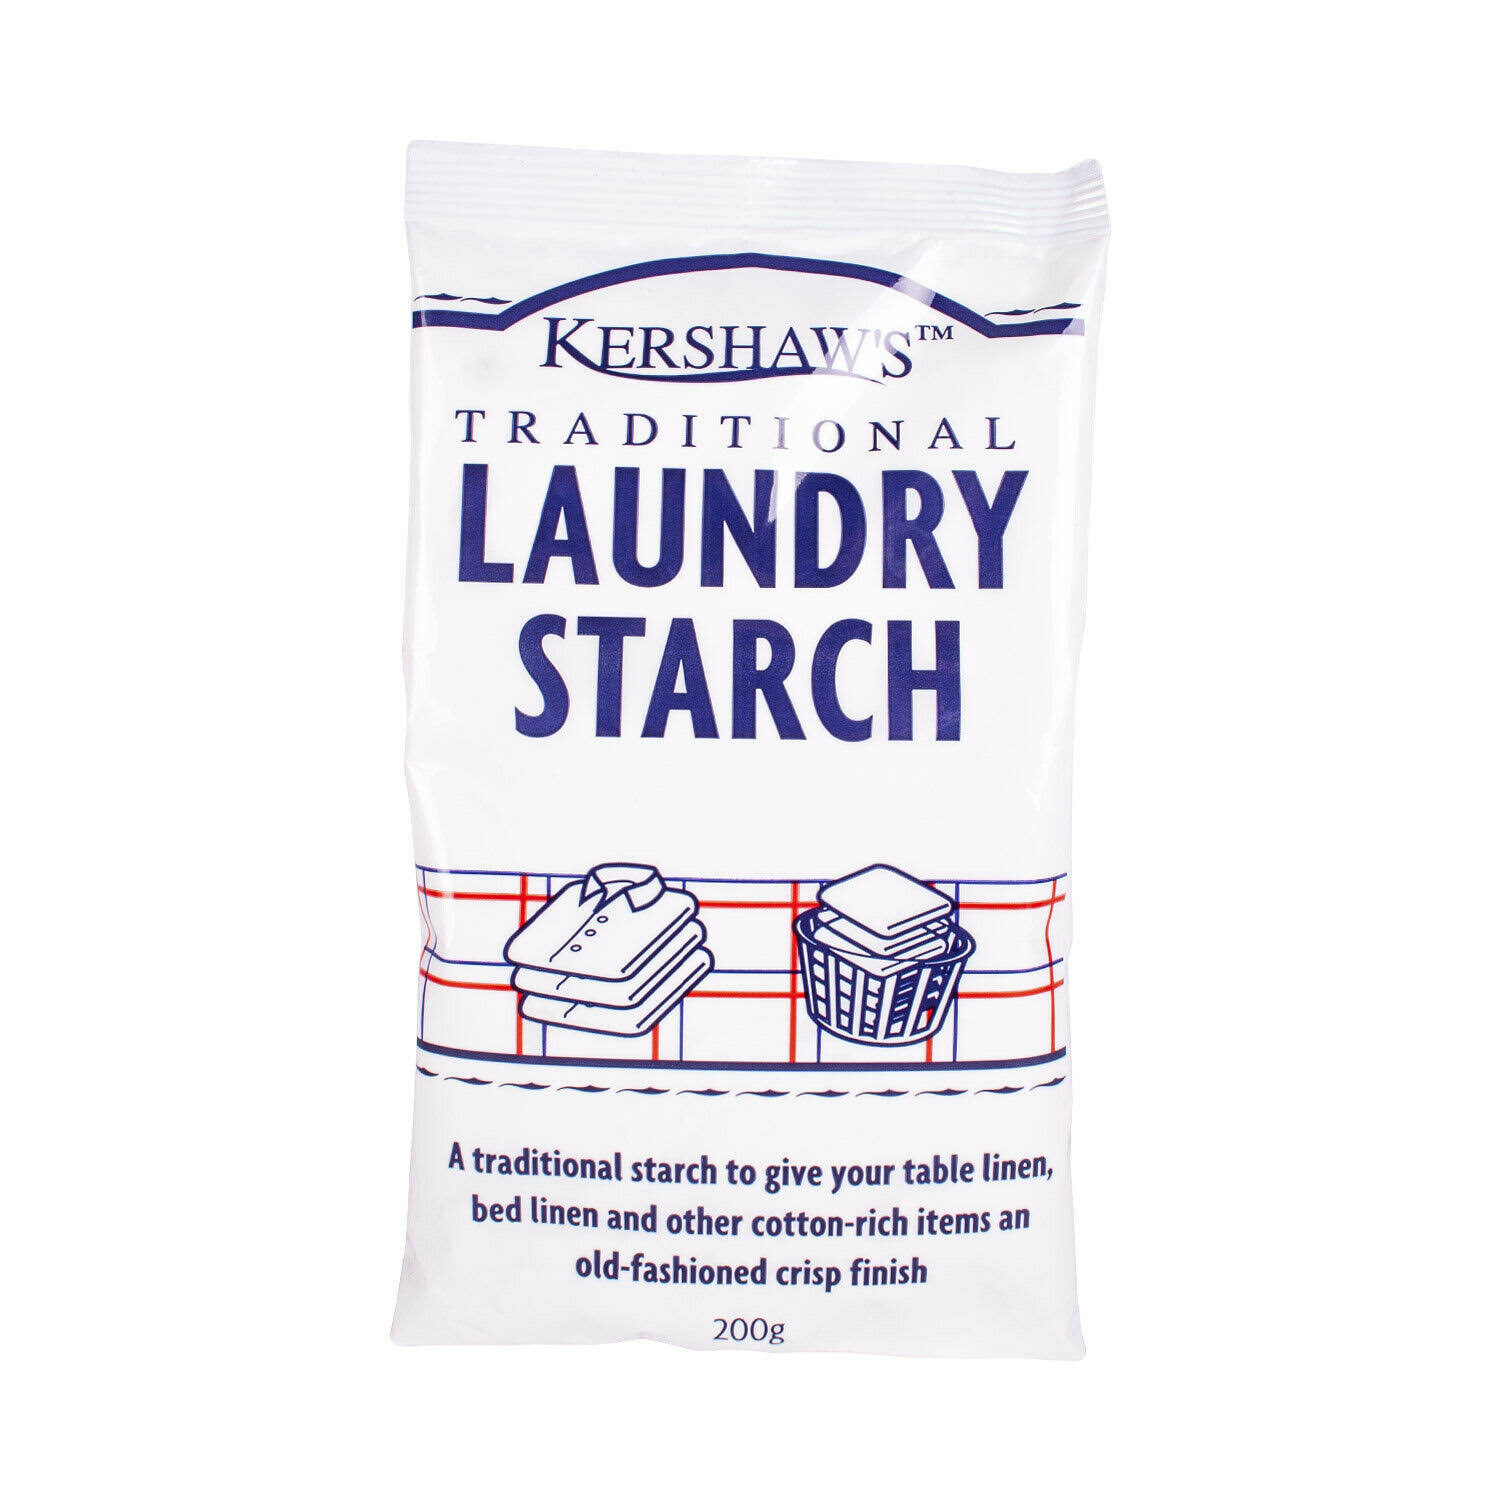 Kershaws Traditional Laundry Starch - 200g